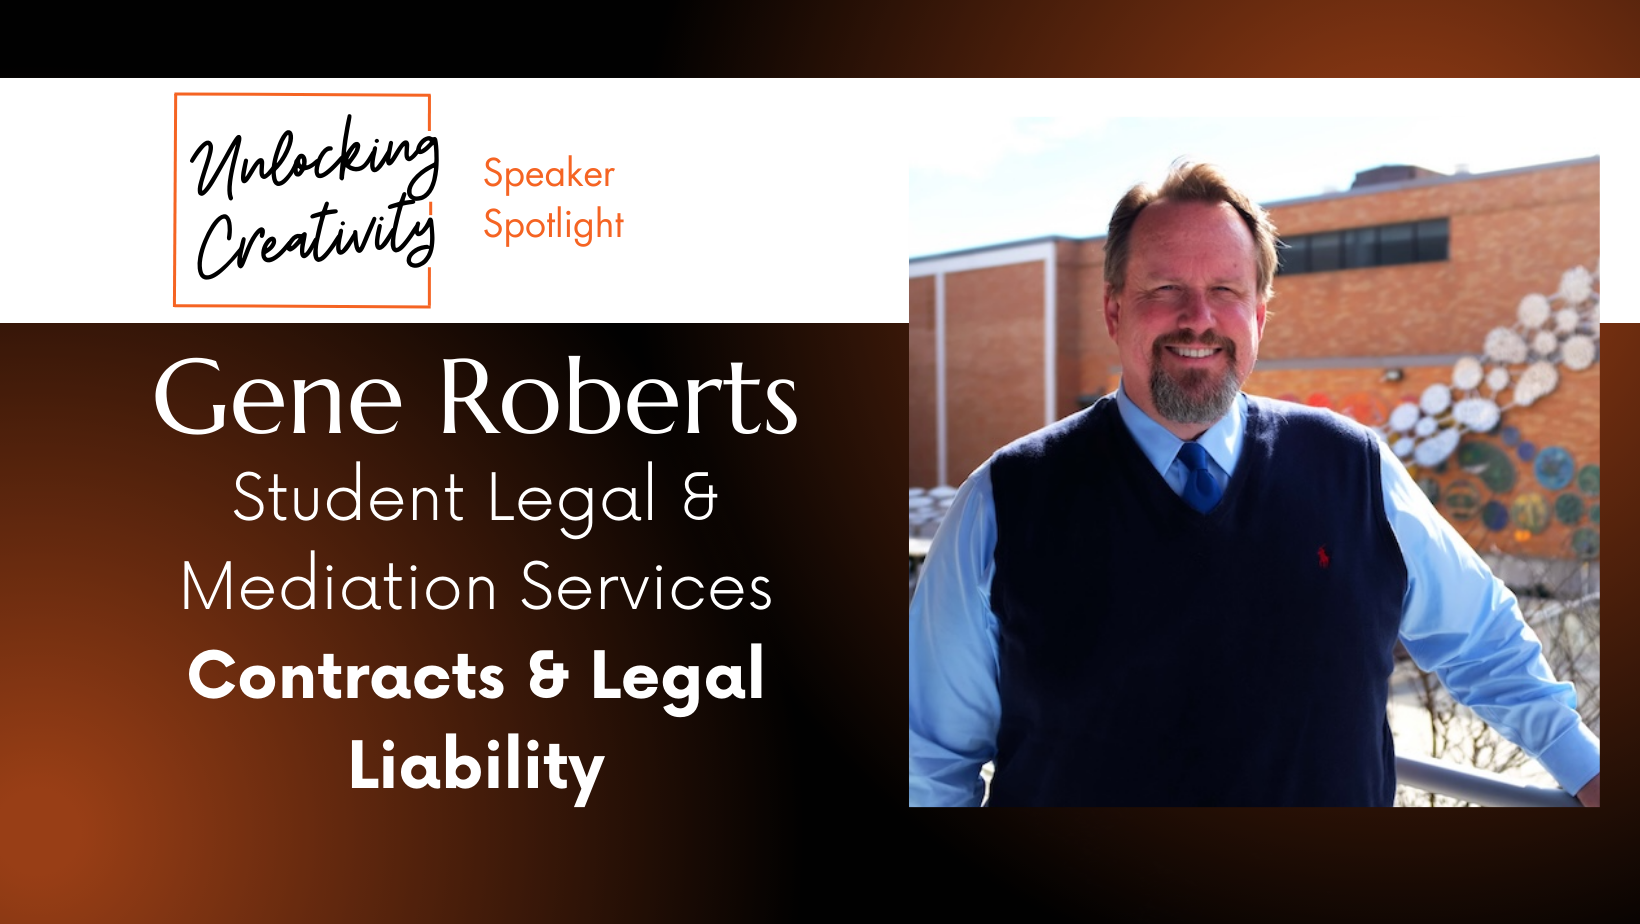 Gene Roberts, Contracts & Legal Liability